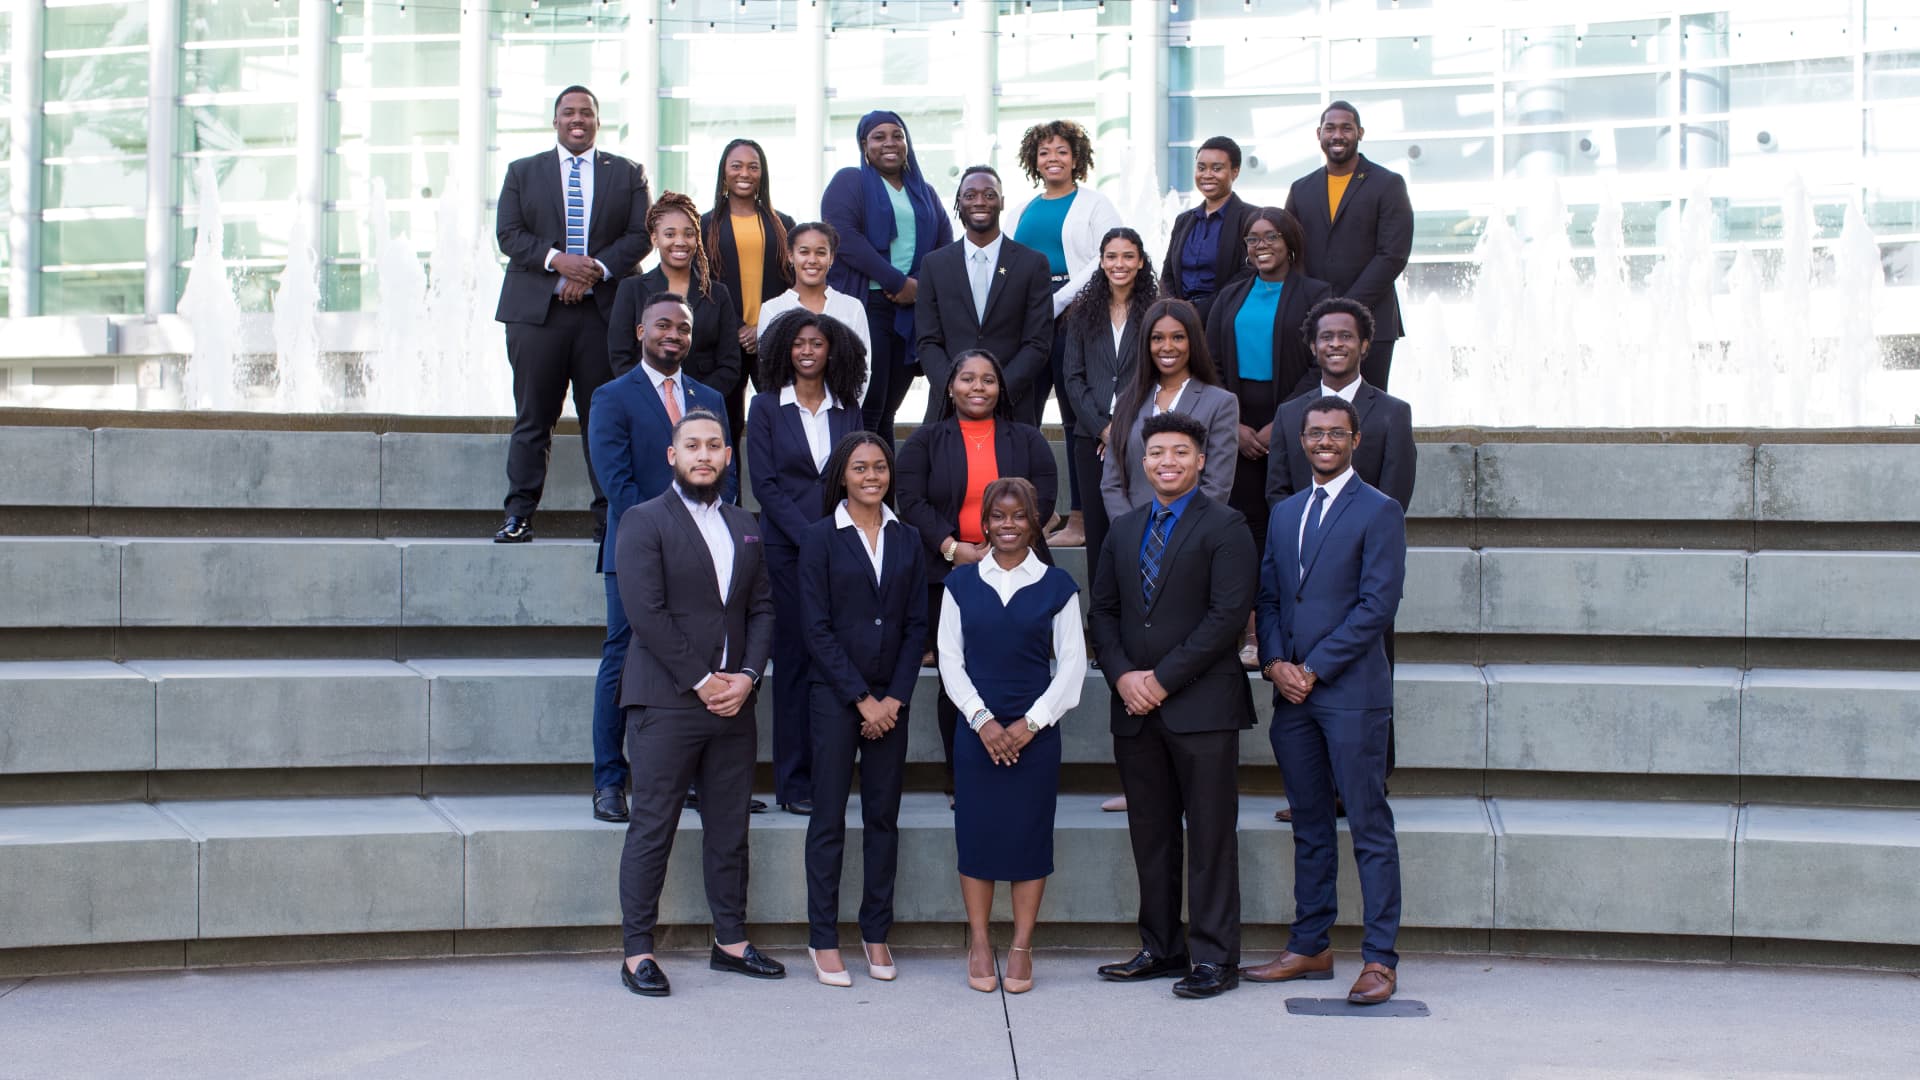 Favour Nerrise (bottom center) stands with the National Socitey of Black Engineers Executive Board and Conference Planning Committee members